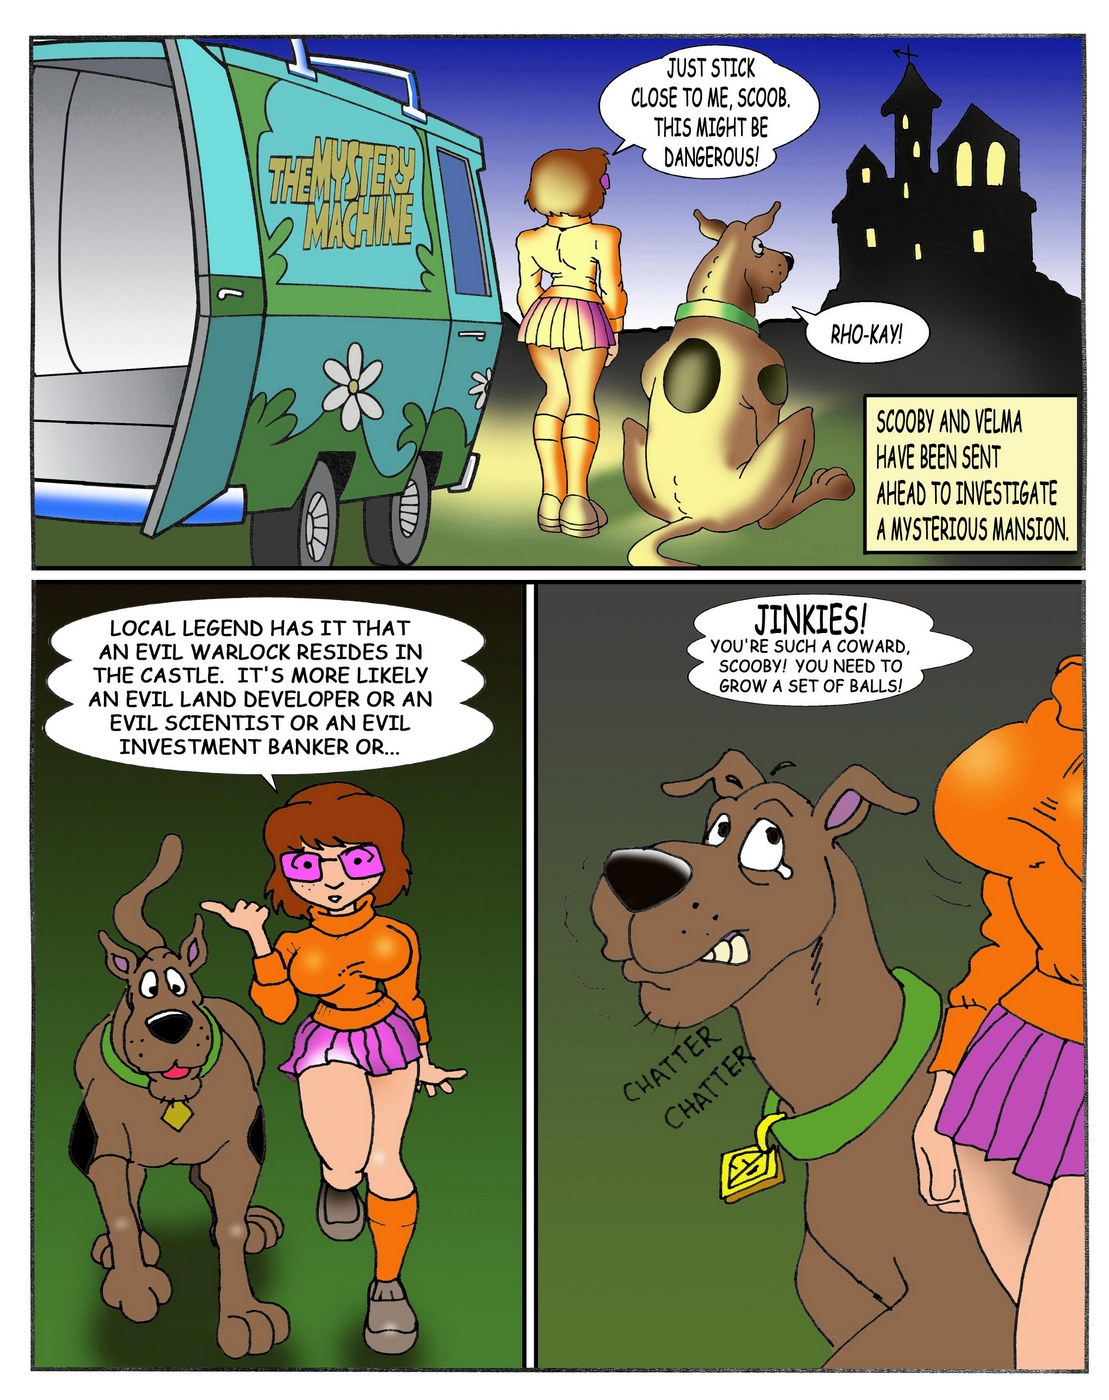 Scooby Doo Mind Control Porn - Mystery of the Sexual Weapon (Scooby-Doo) - Porn Cartoon Comics